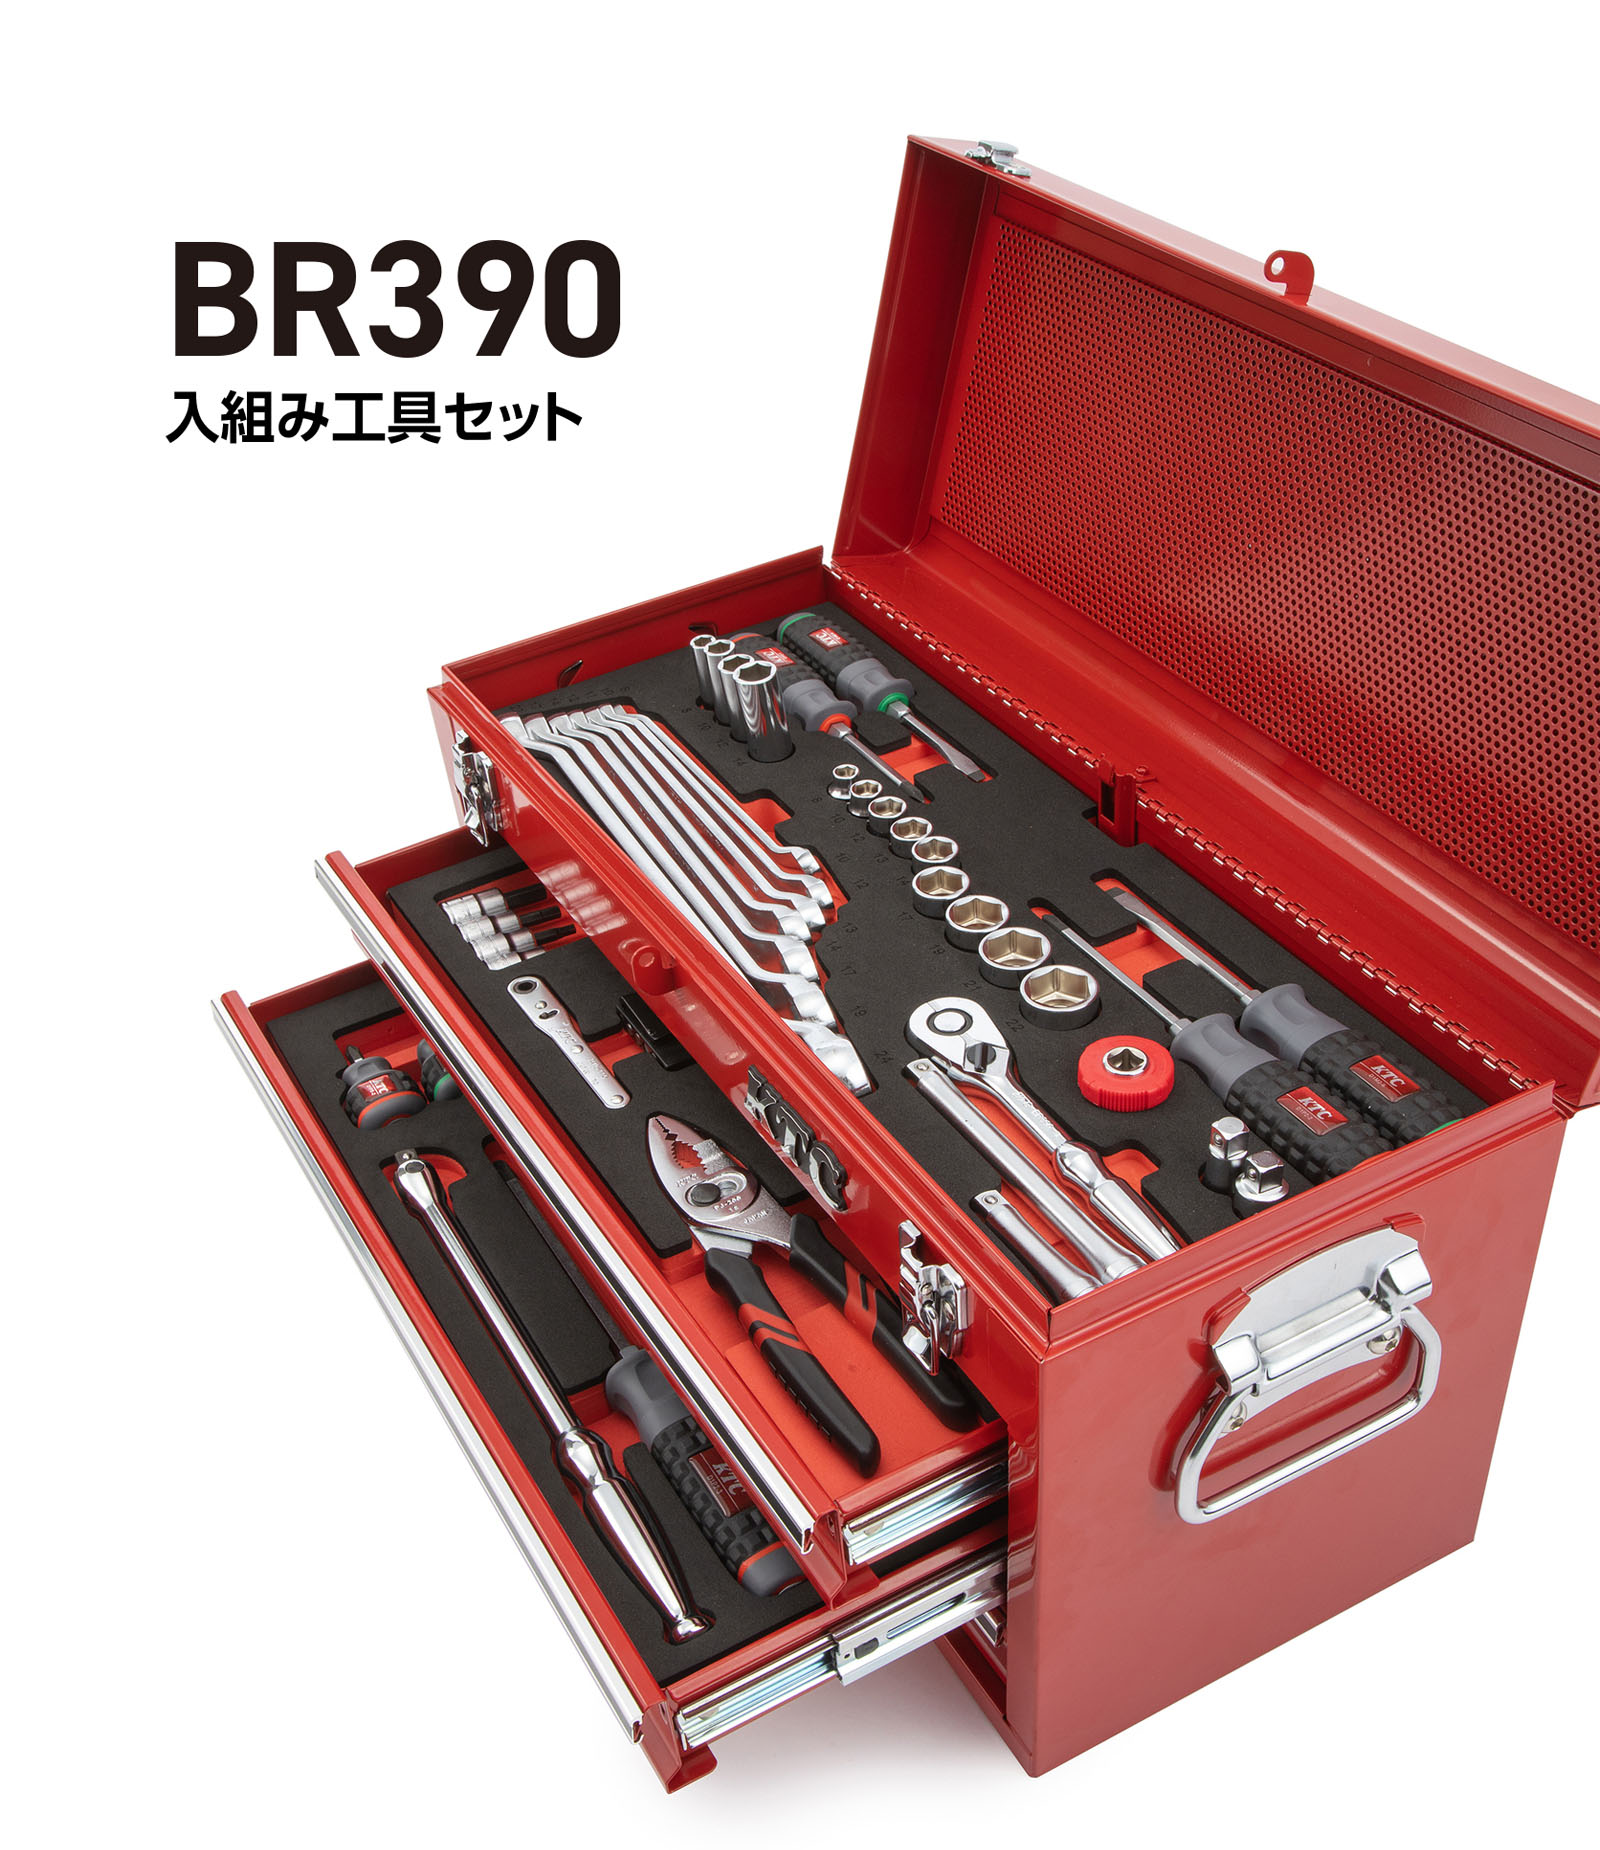 BR390入組み工具セット